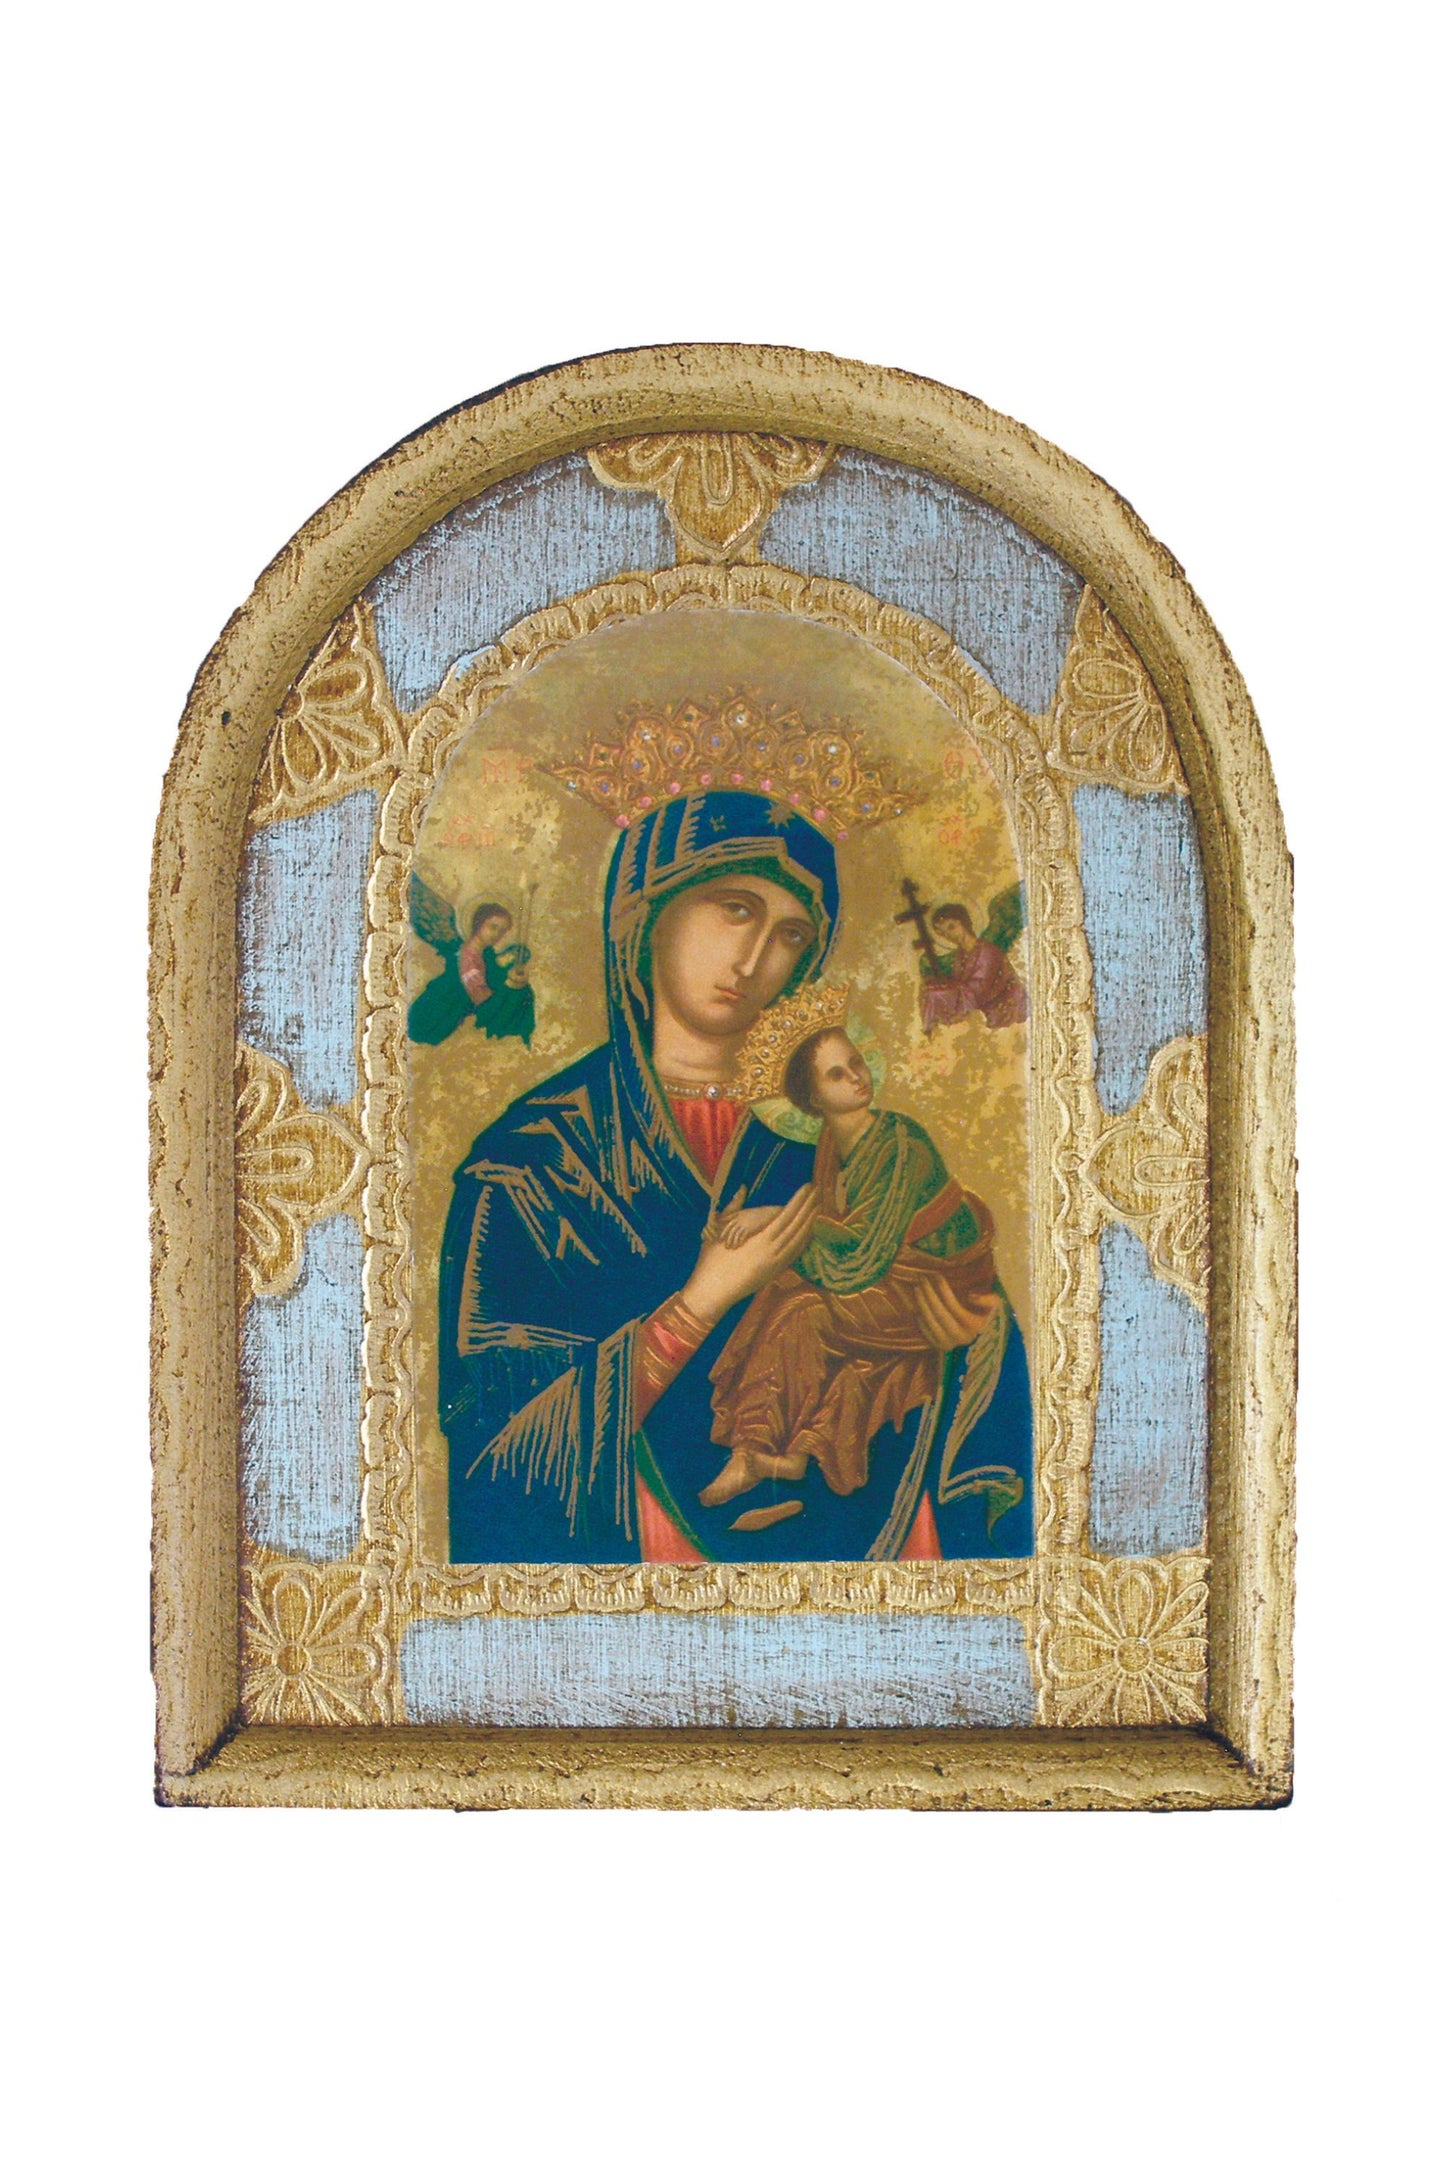 Z-527-P Our Lady of Perpetual Help Florentine Plaque 4.5x6"